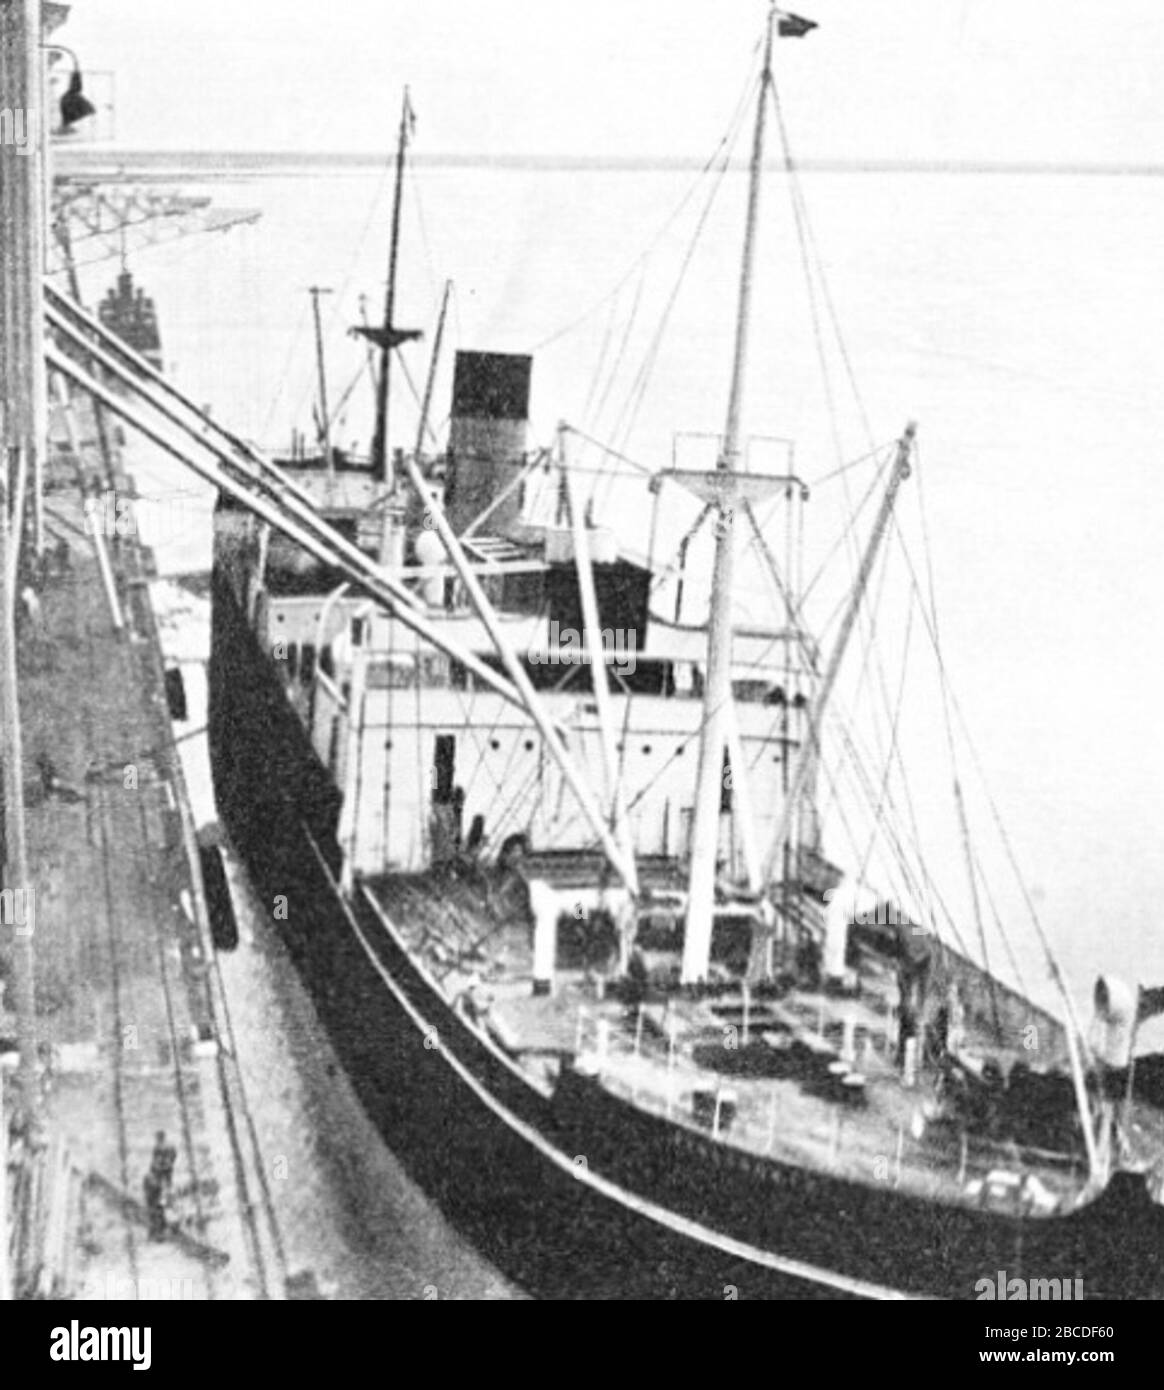 'Pennyworth in Churchill, 1933.  Original caption:  ONE OF THE FIRST GRAIN CARGOES to be loaded at Churchill went into the Pennyworth. When her holds had been cleared and the necessary shifting boards erected in them, the long pipe-arms were swung from the grain elevator and the grain began to pour in. About 8,000 tons of grain were loaded on this occasion.; 1933; http://www.shippingwondersoftheworld.com/churchill.html; Unknown author; ' Stock Photo